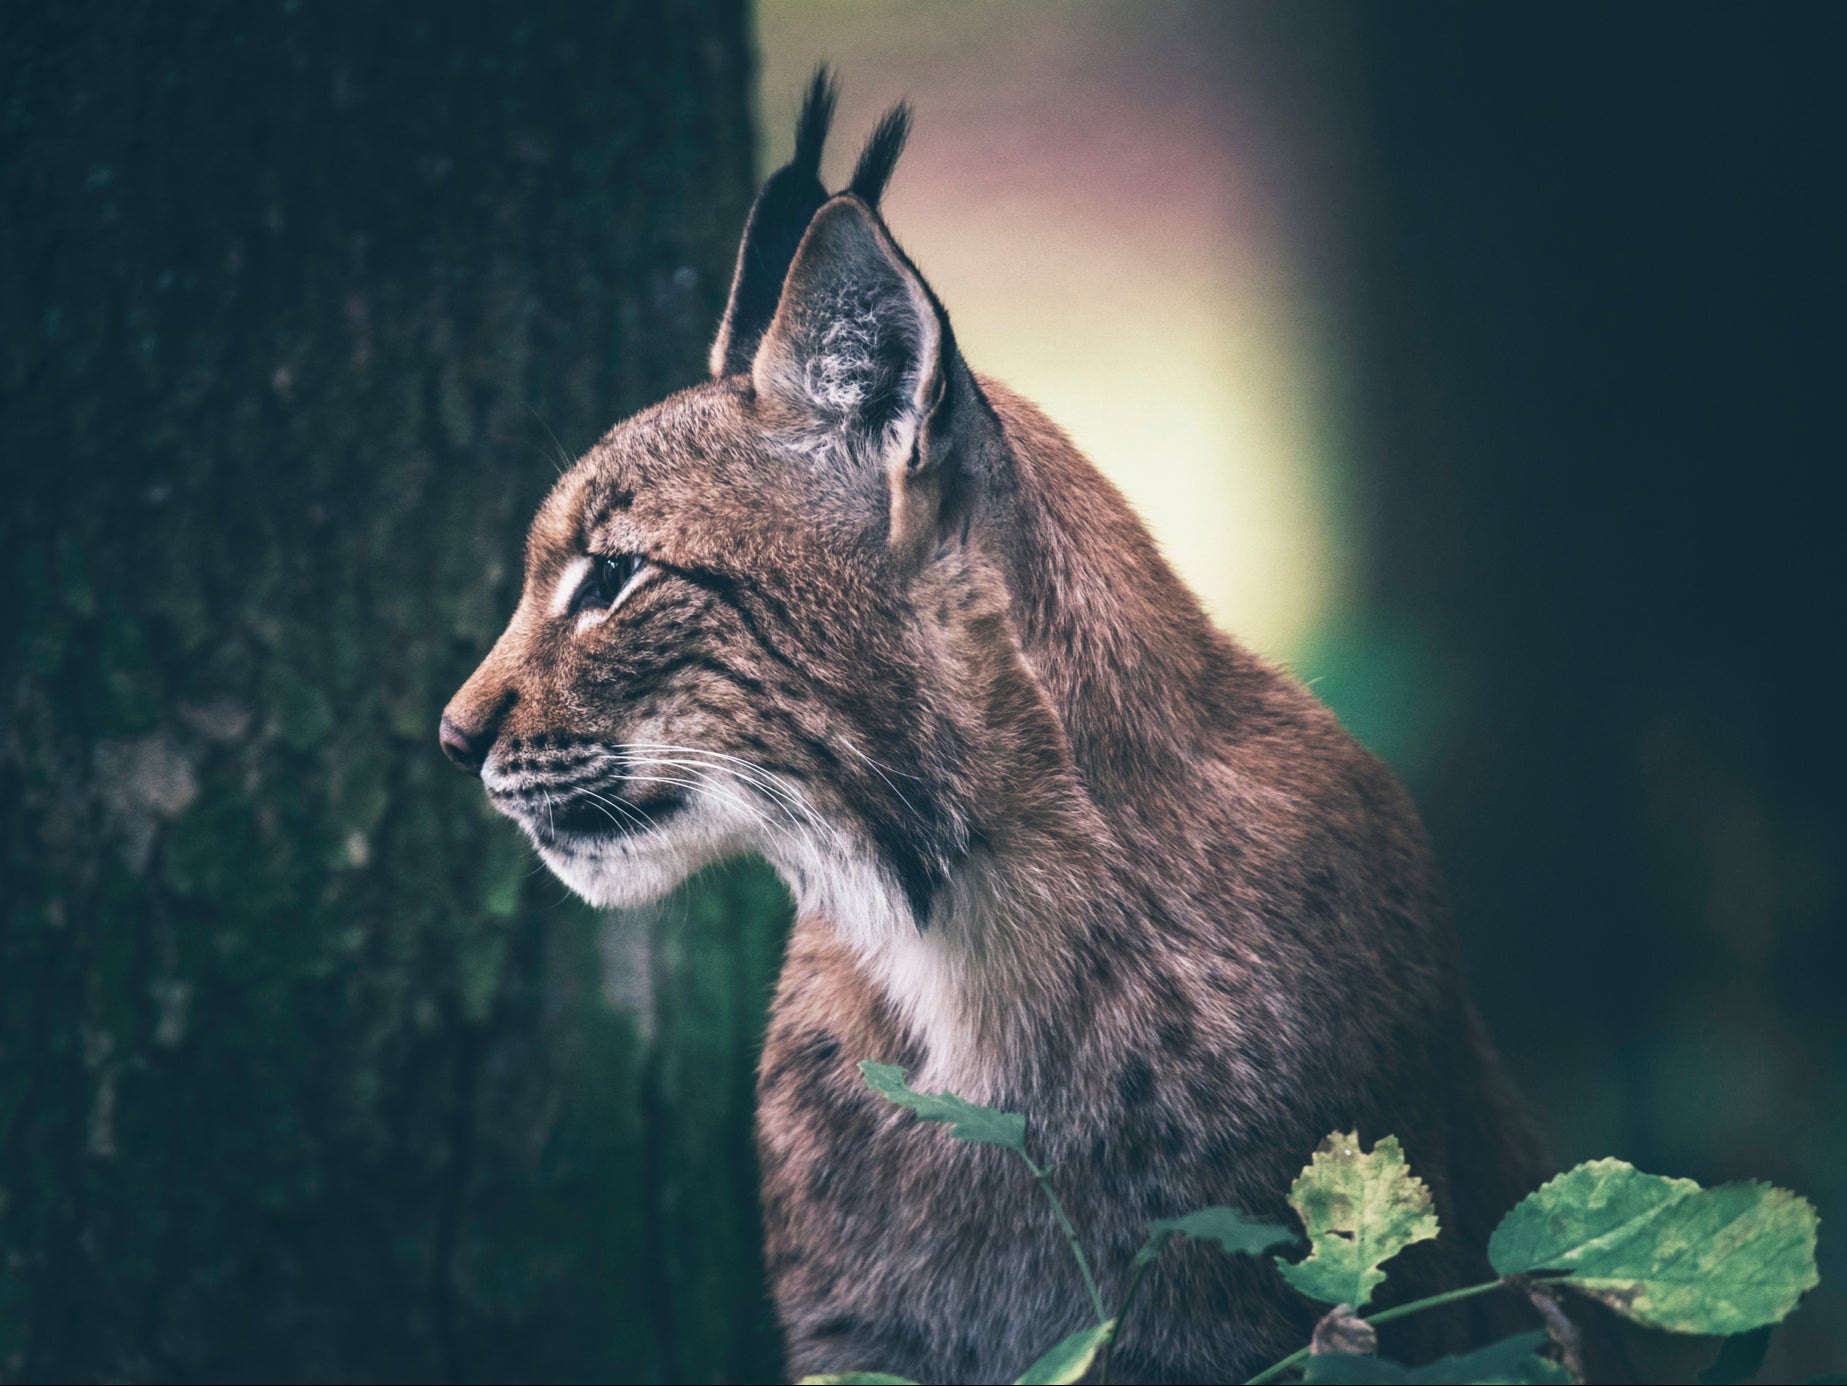 Lynx study seeks views on reintroducing wild population of cats to Scotland  | The Independent